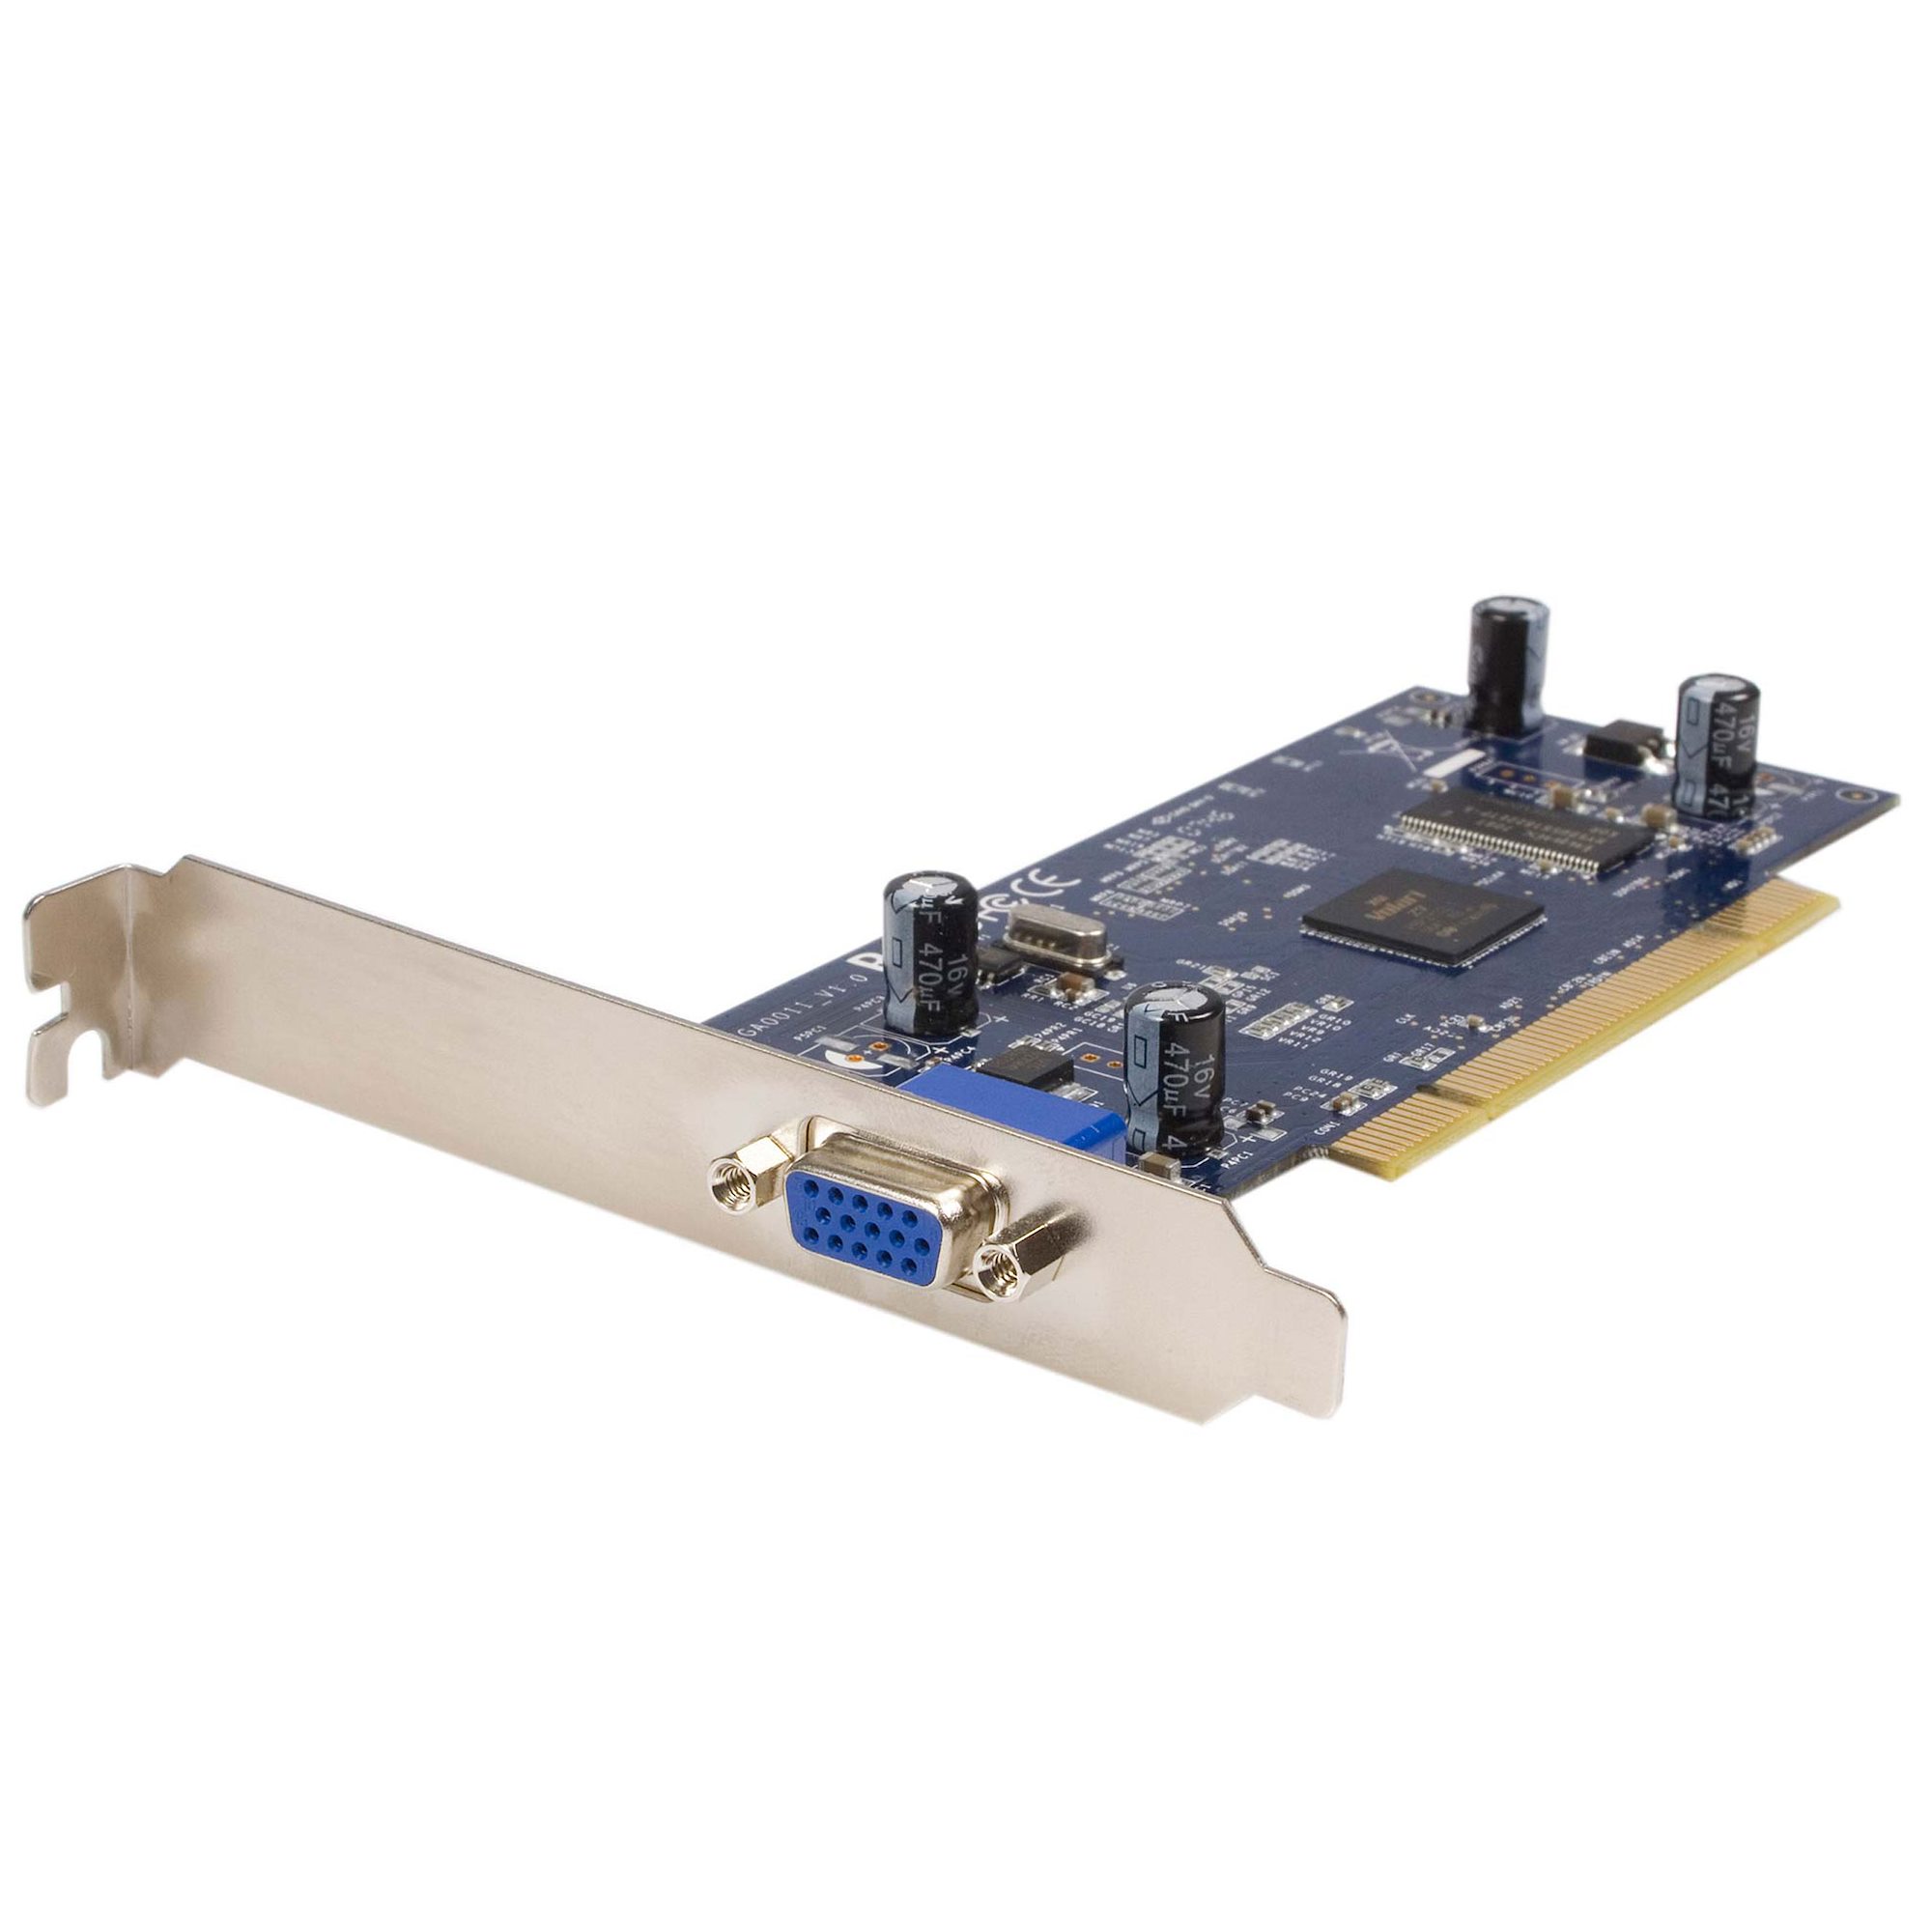 16 MB PCI VGA Video Adapter Card - Our video cards and sound cards